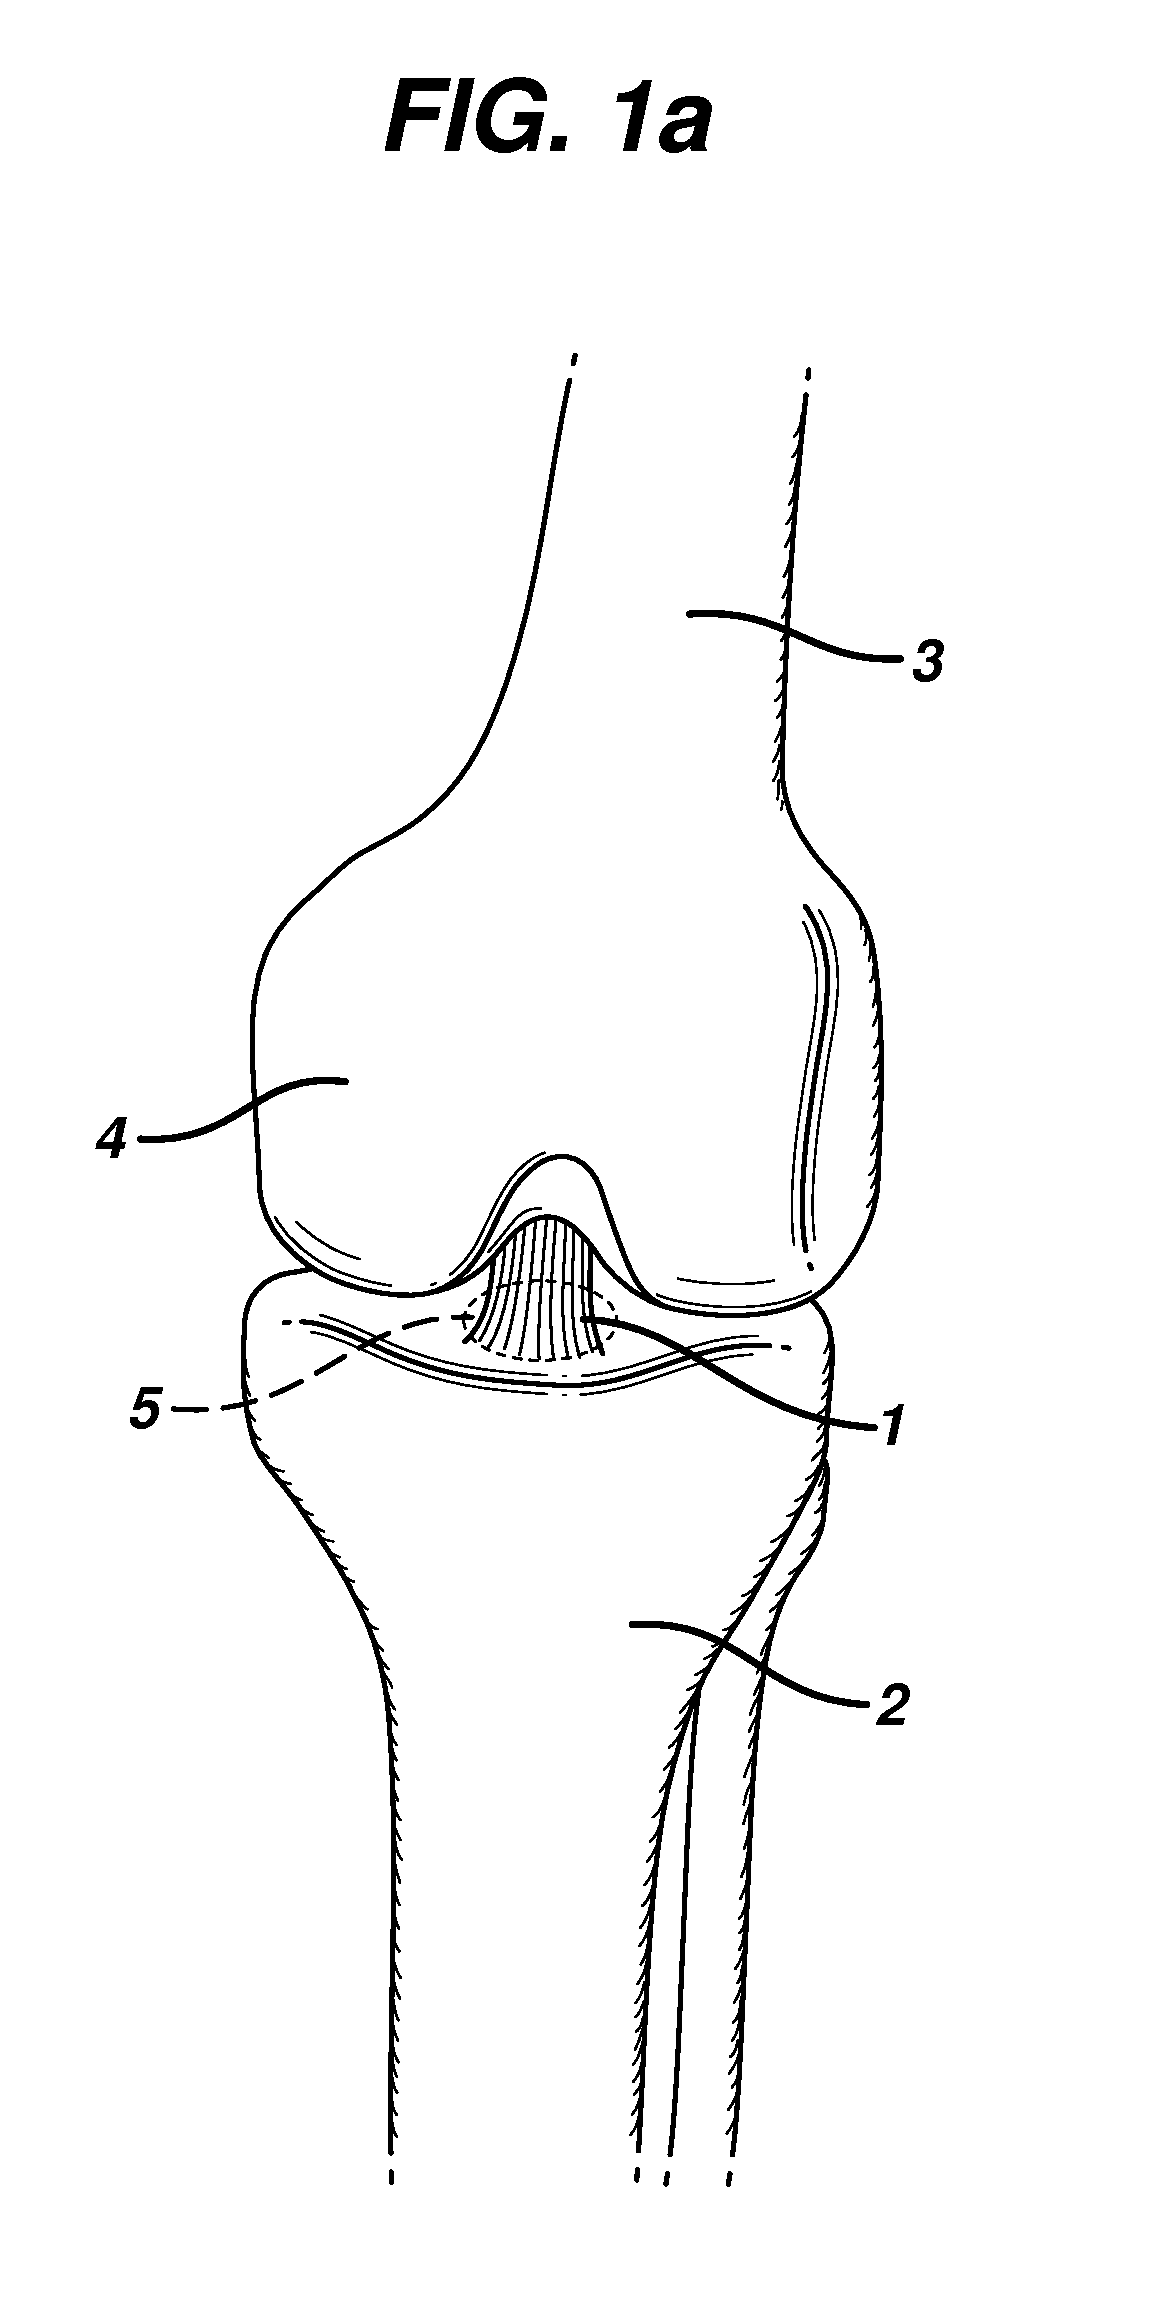 Method for anchoring autologous or artificial tendon grafts in bone